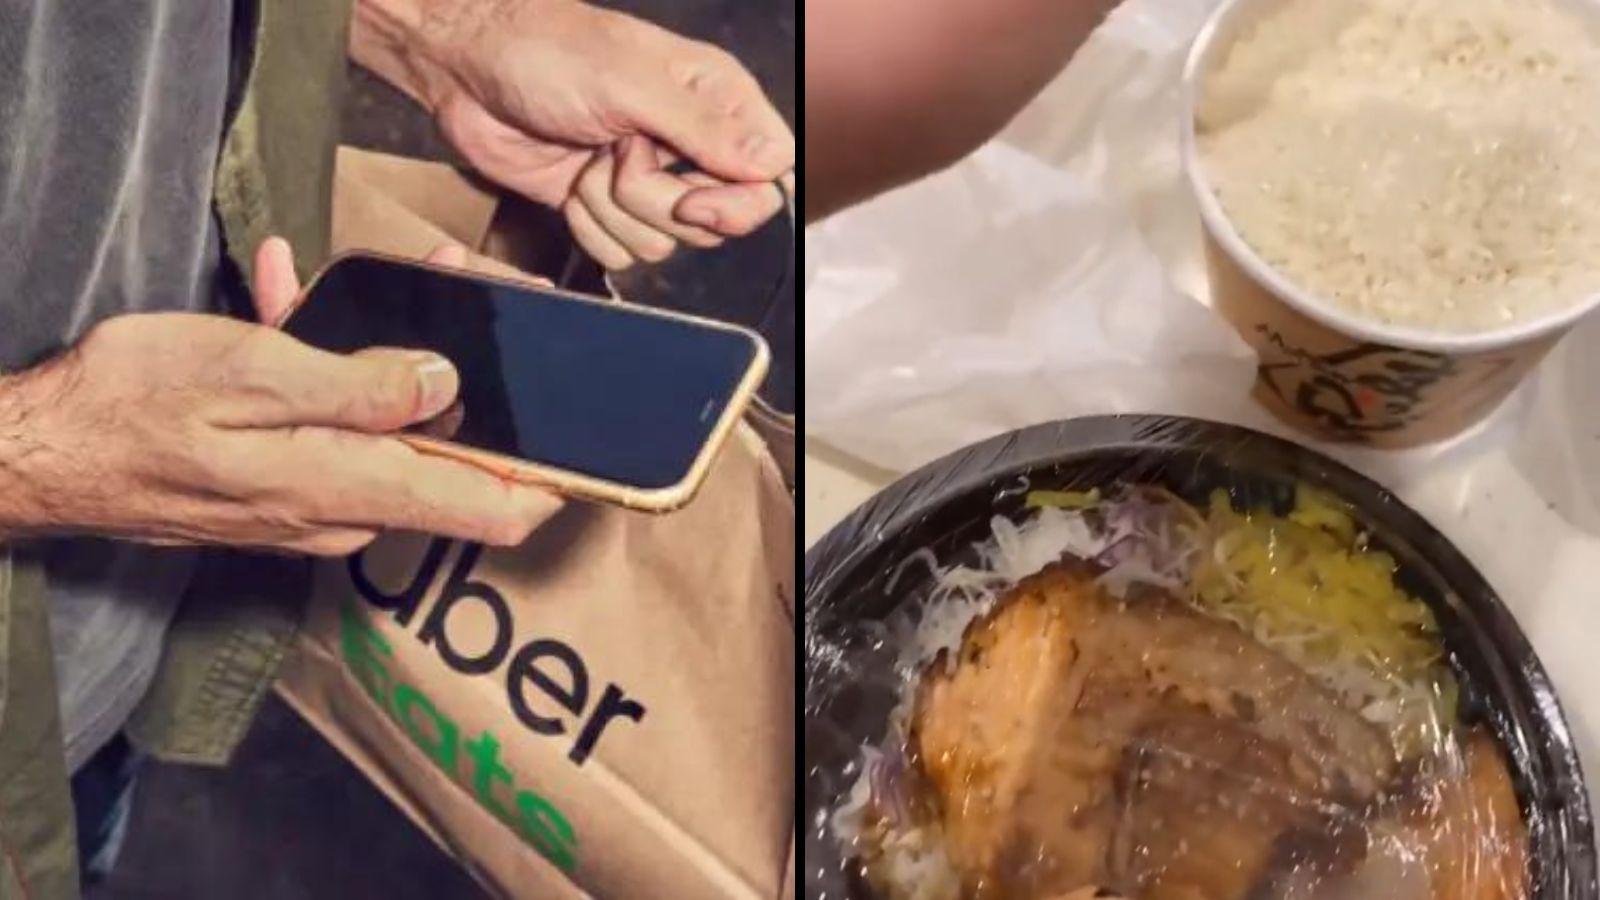 Uber Eats customer receives uncooked rice